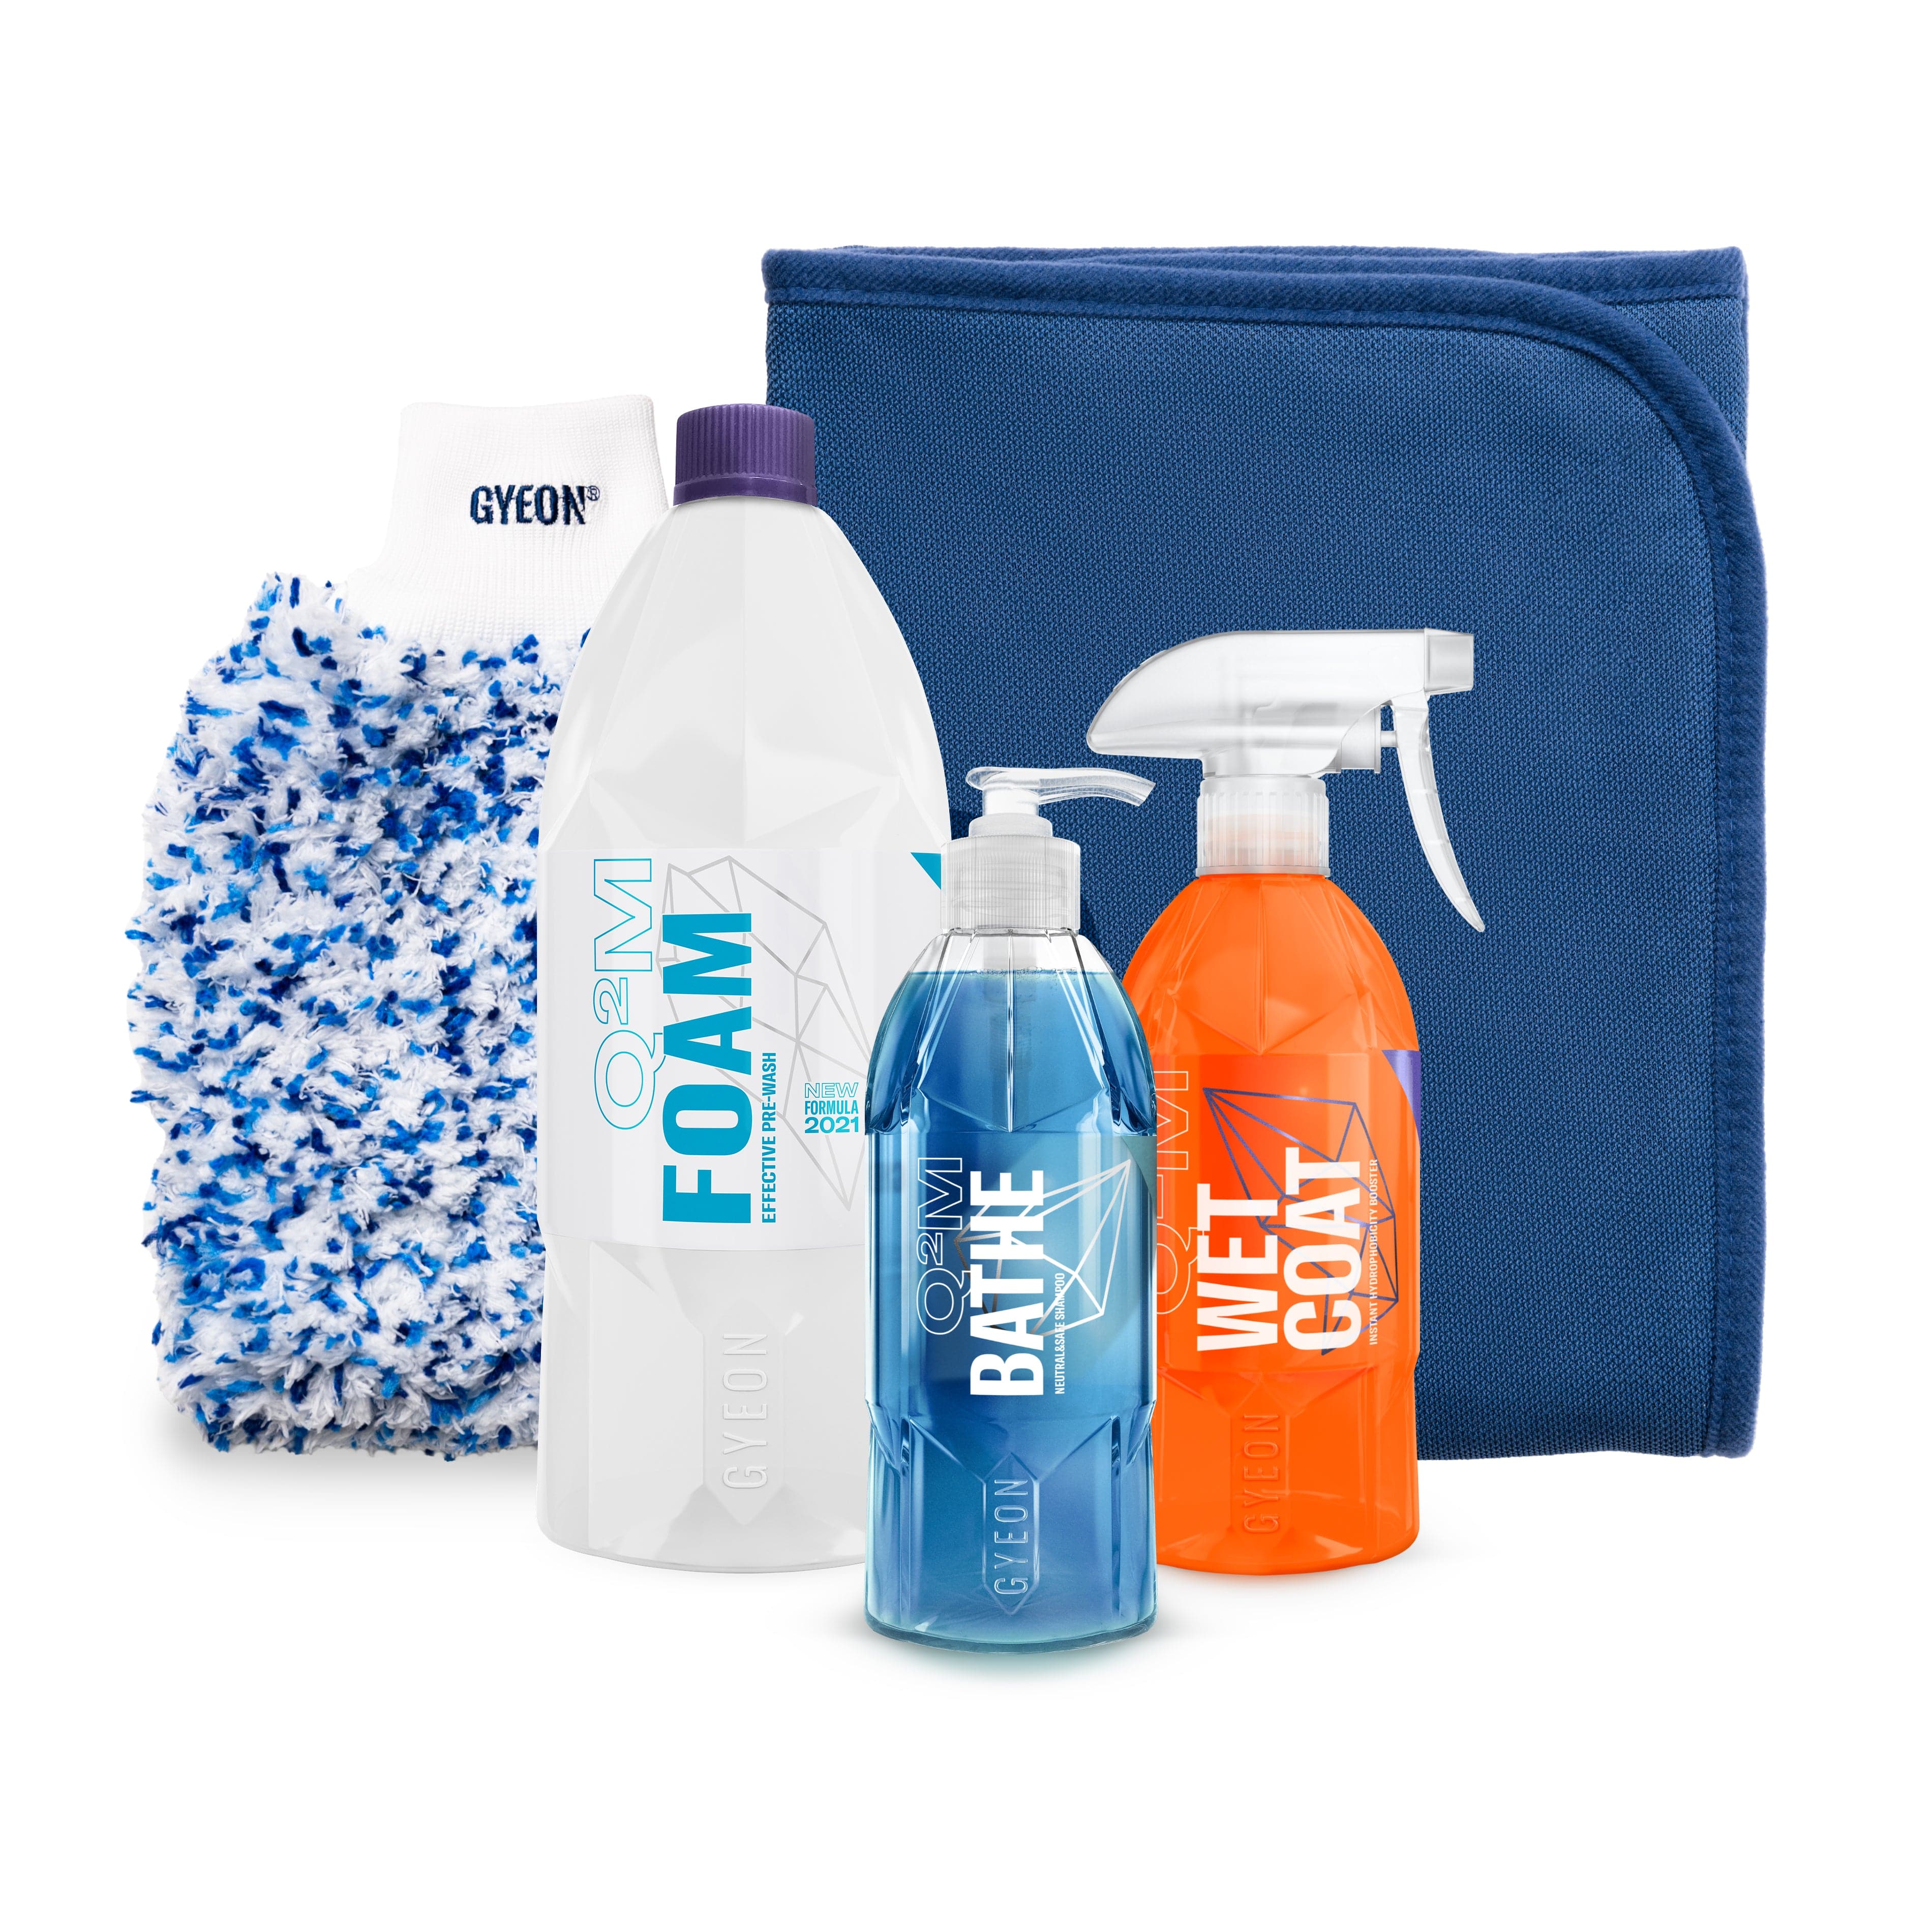 Car Supplies Warehouse - If you're looking to keep your interior fresh,  clean, and protected, Gyeon products are a must! Gyeon offers a variety of  products to help clean, protect, and maintain